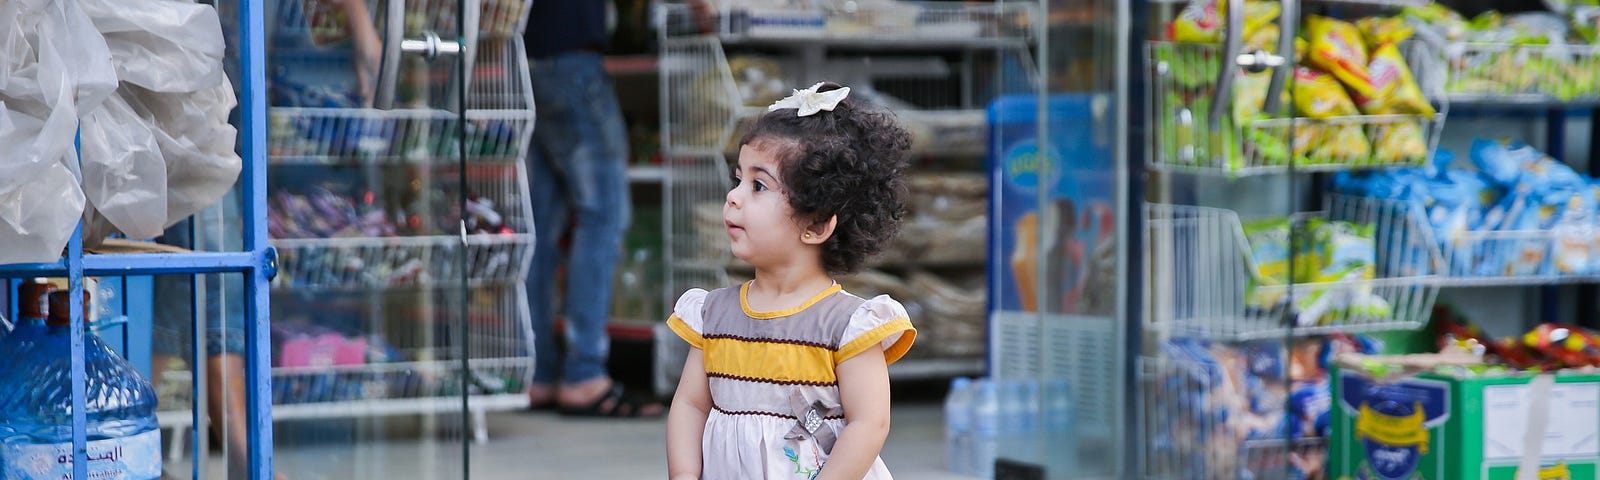 Little girl holding coin purse in front of store.